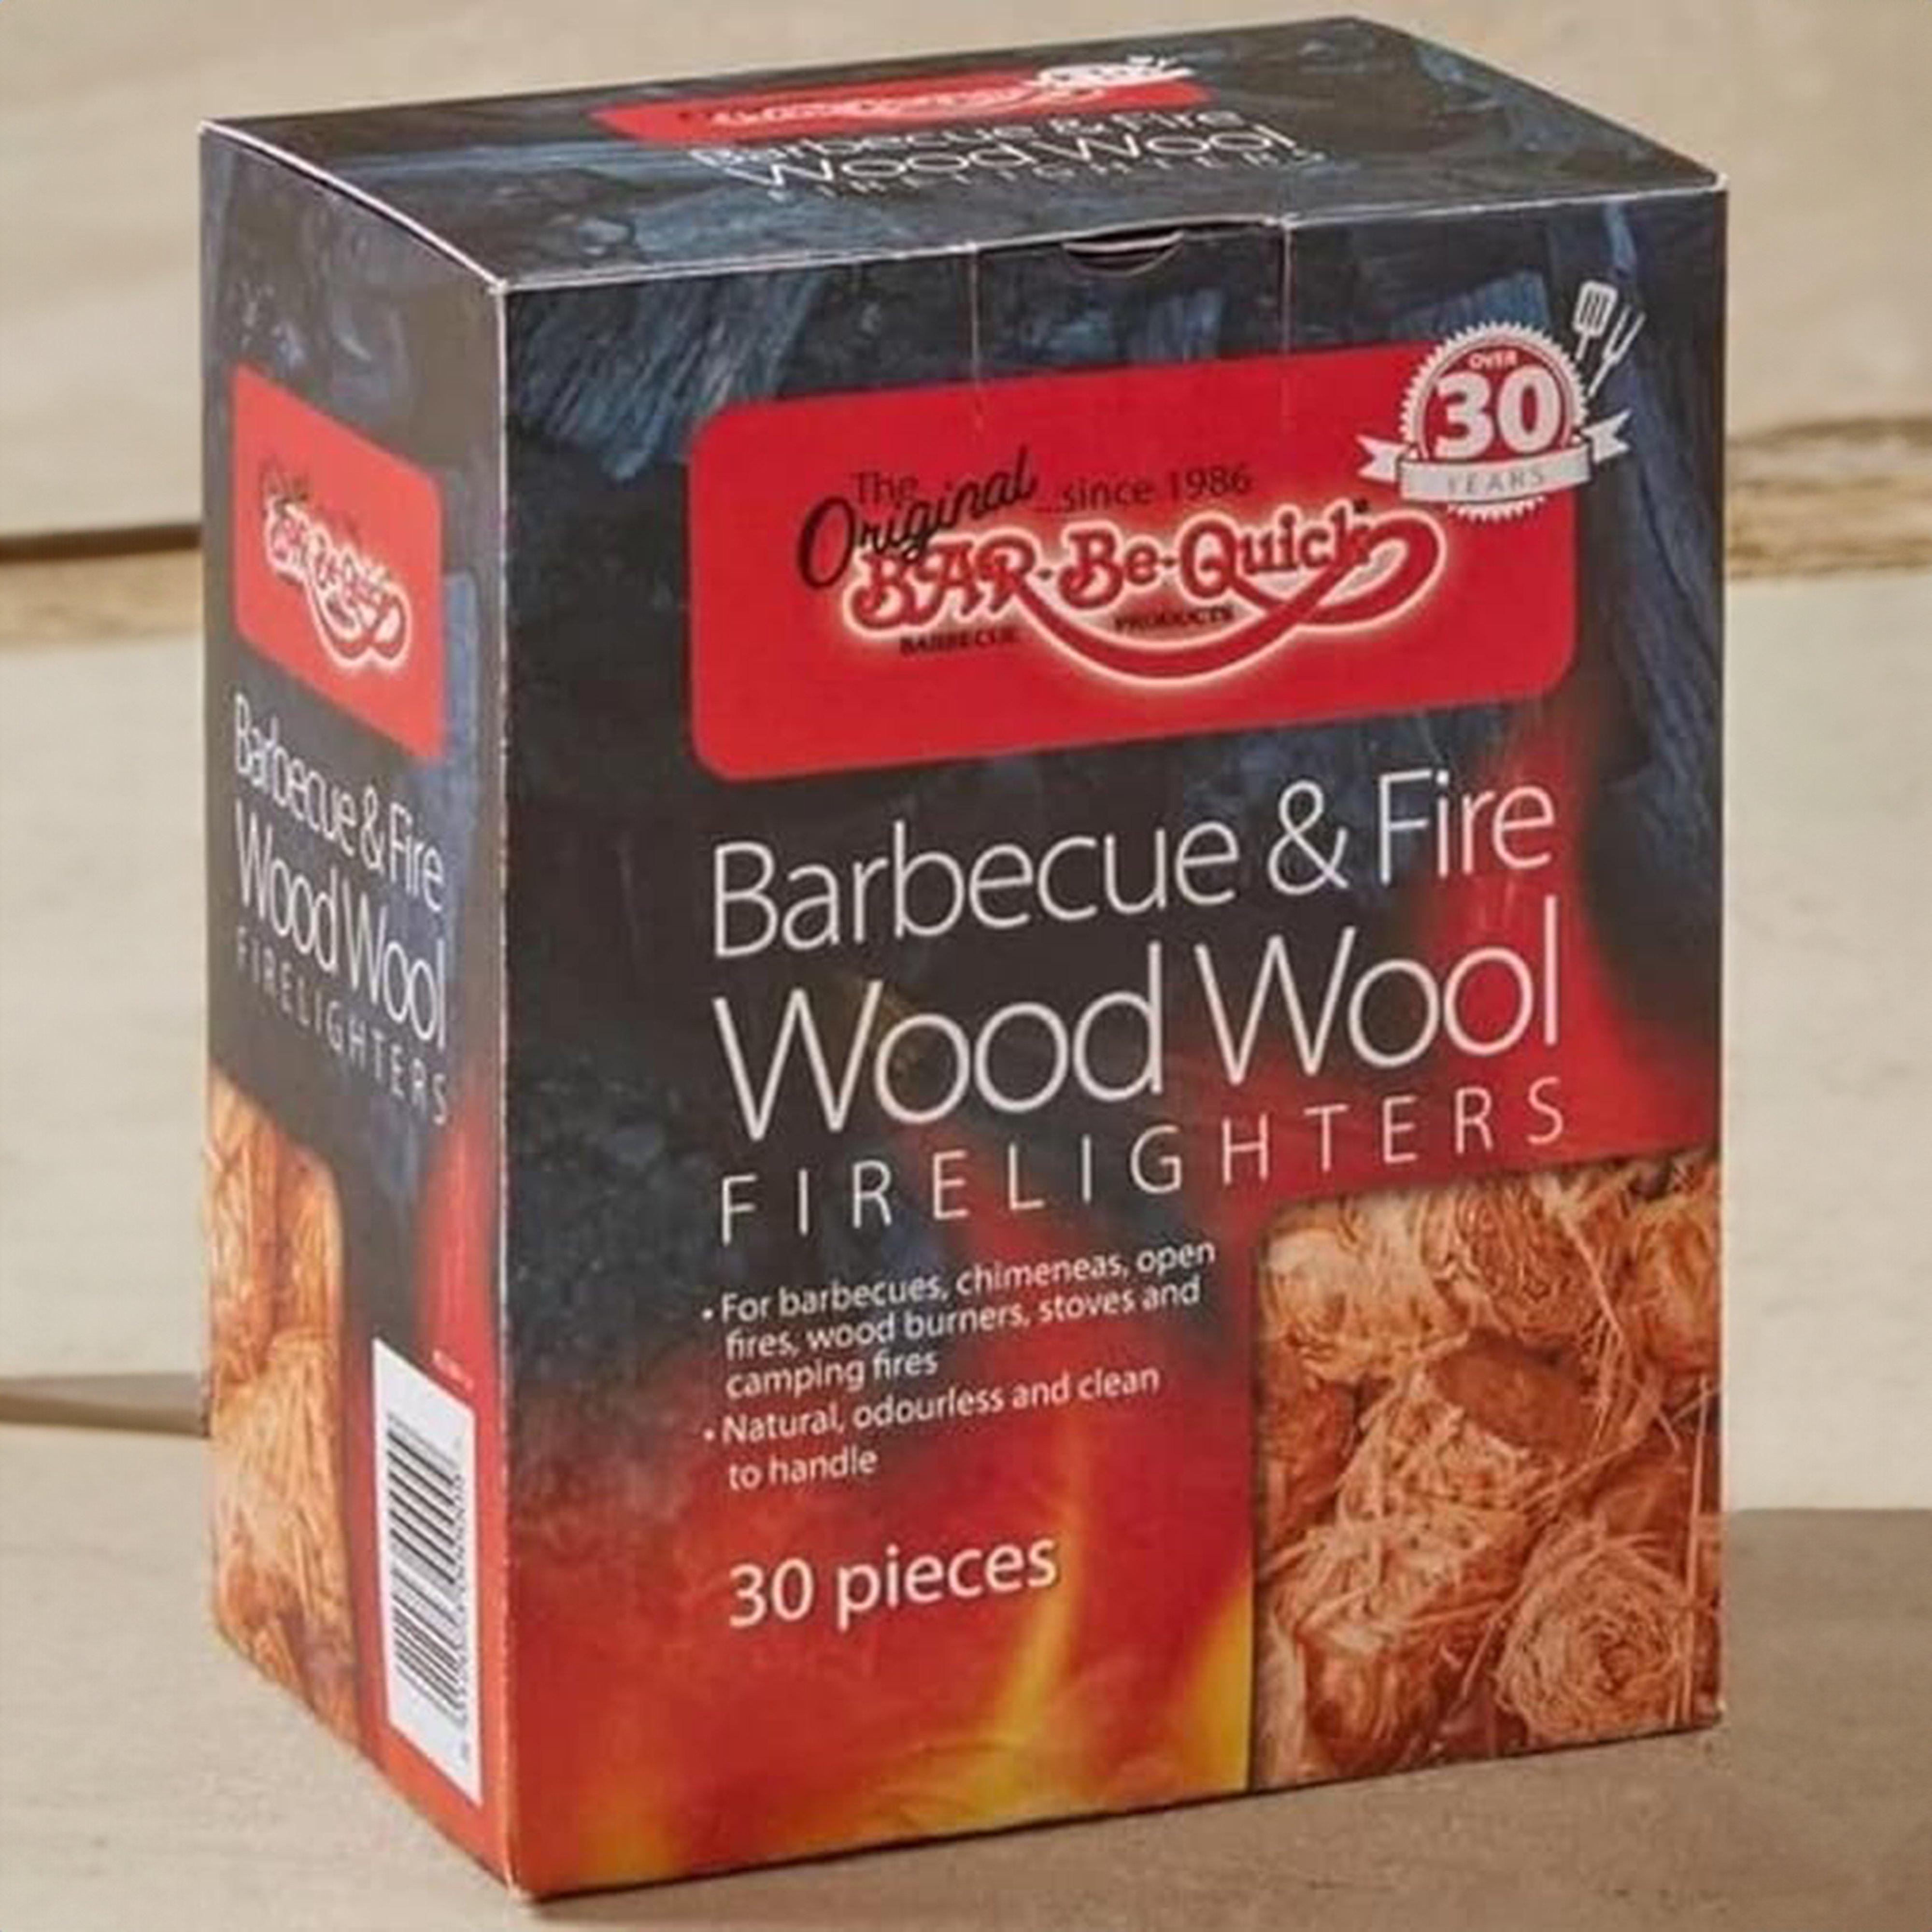 BAR BE QUICK Wood Wool Firelighters